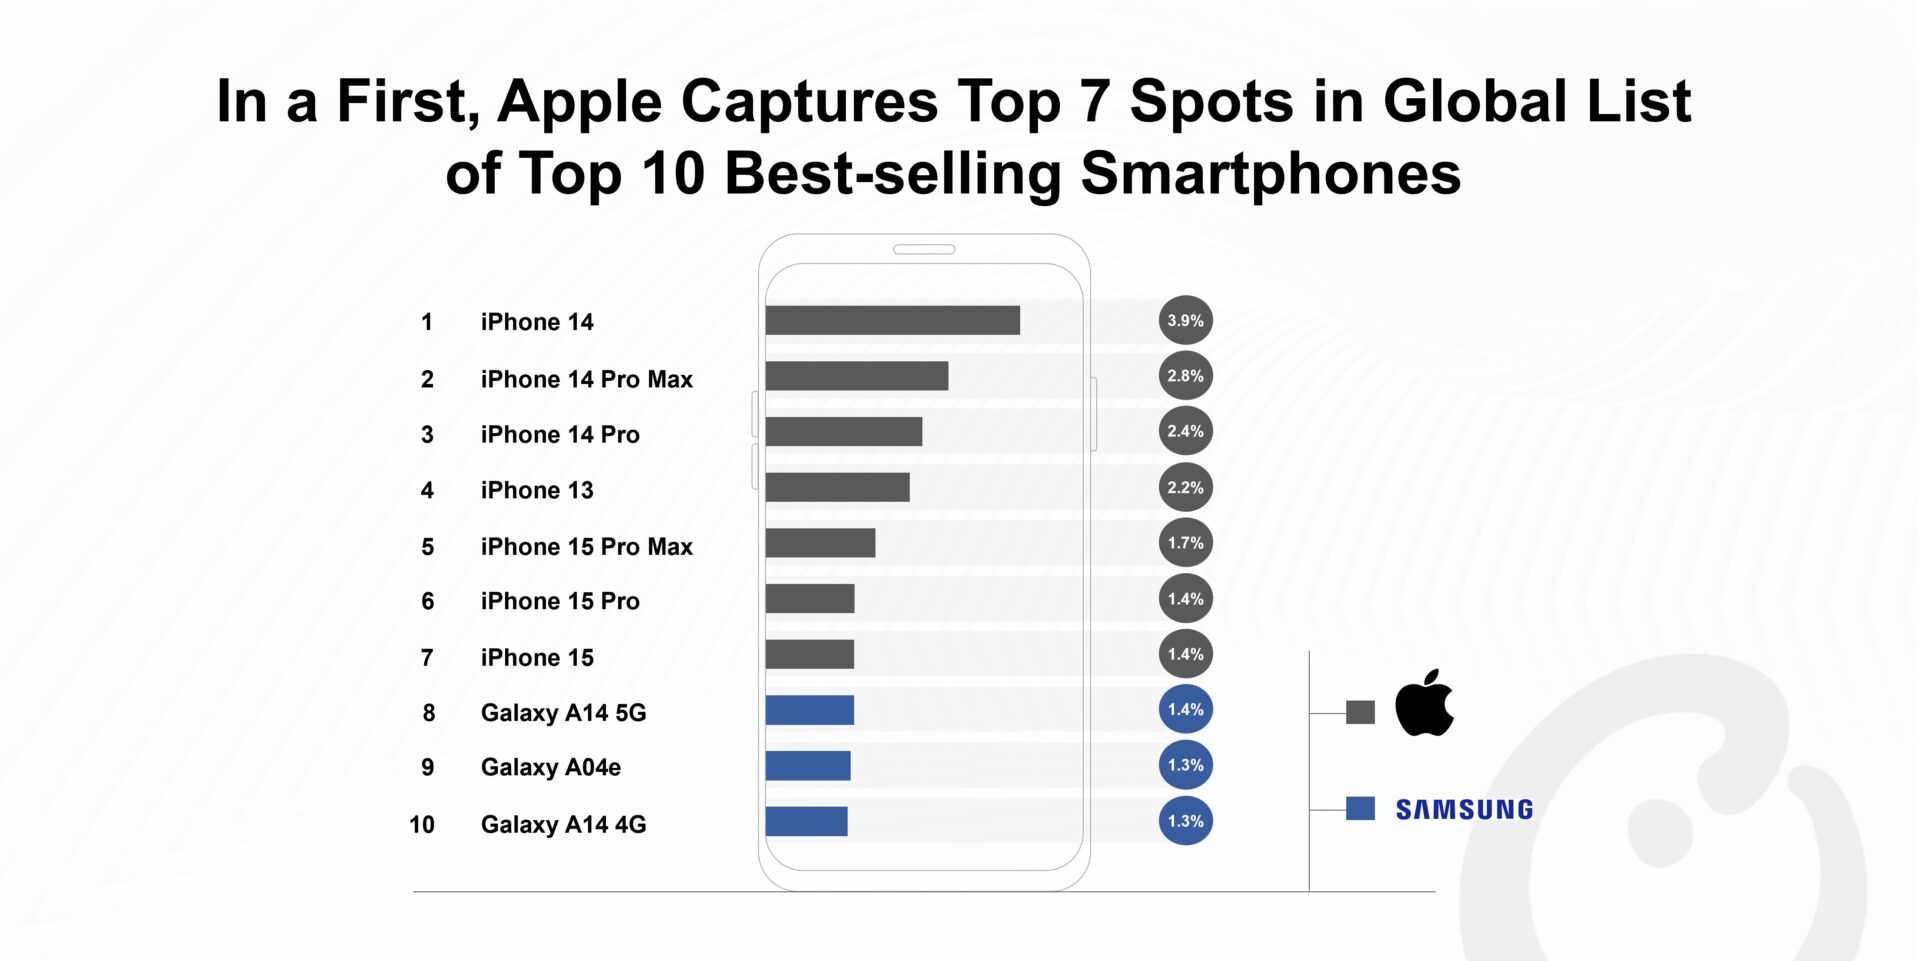 In a First, Apple Captures Top 7 Spots in Global List of Top 10